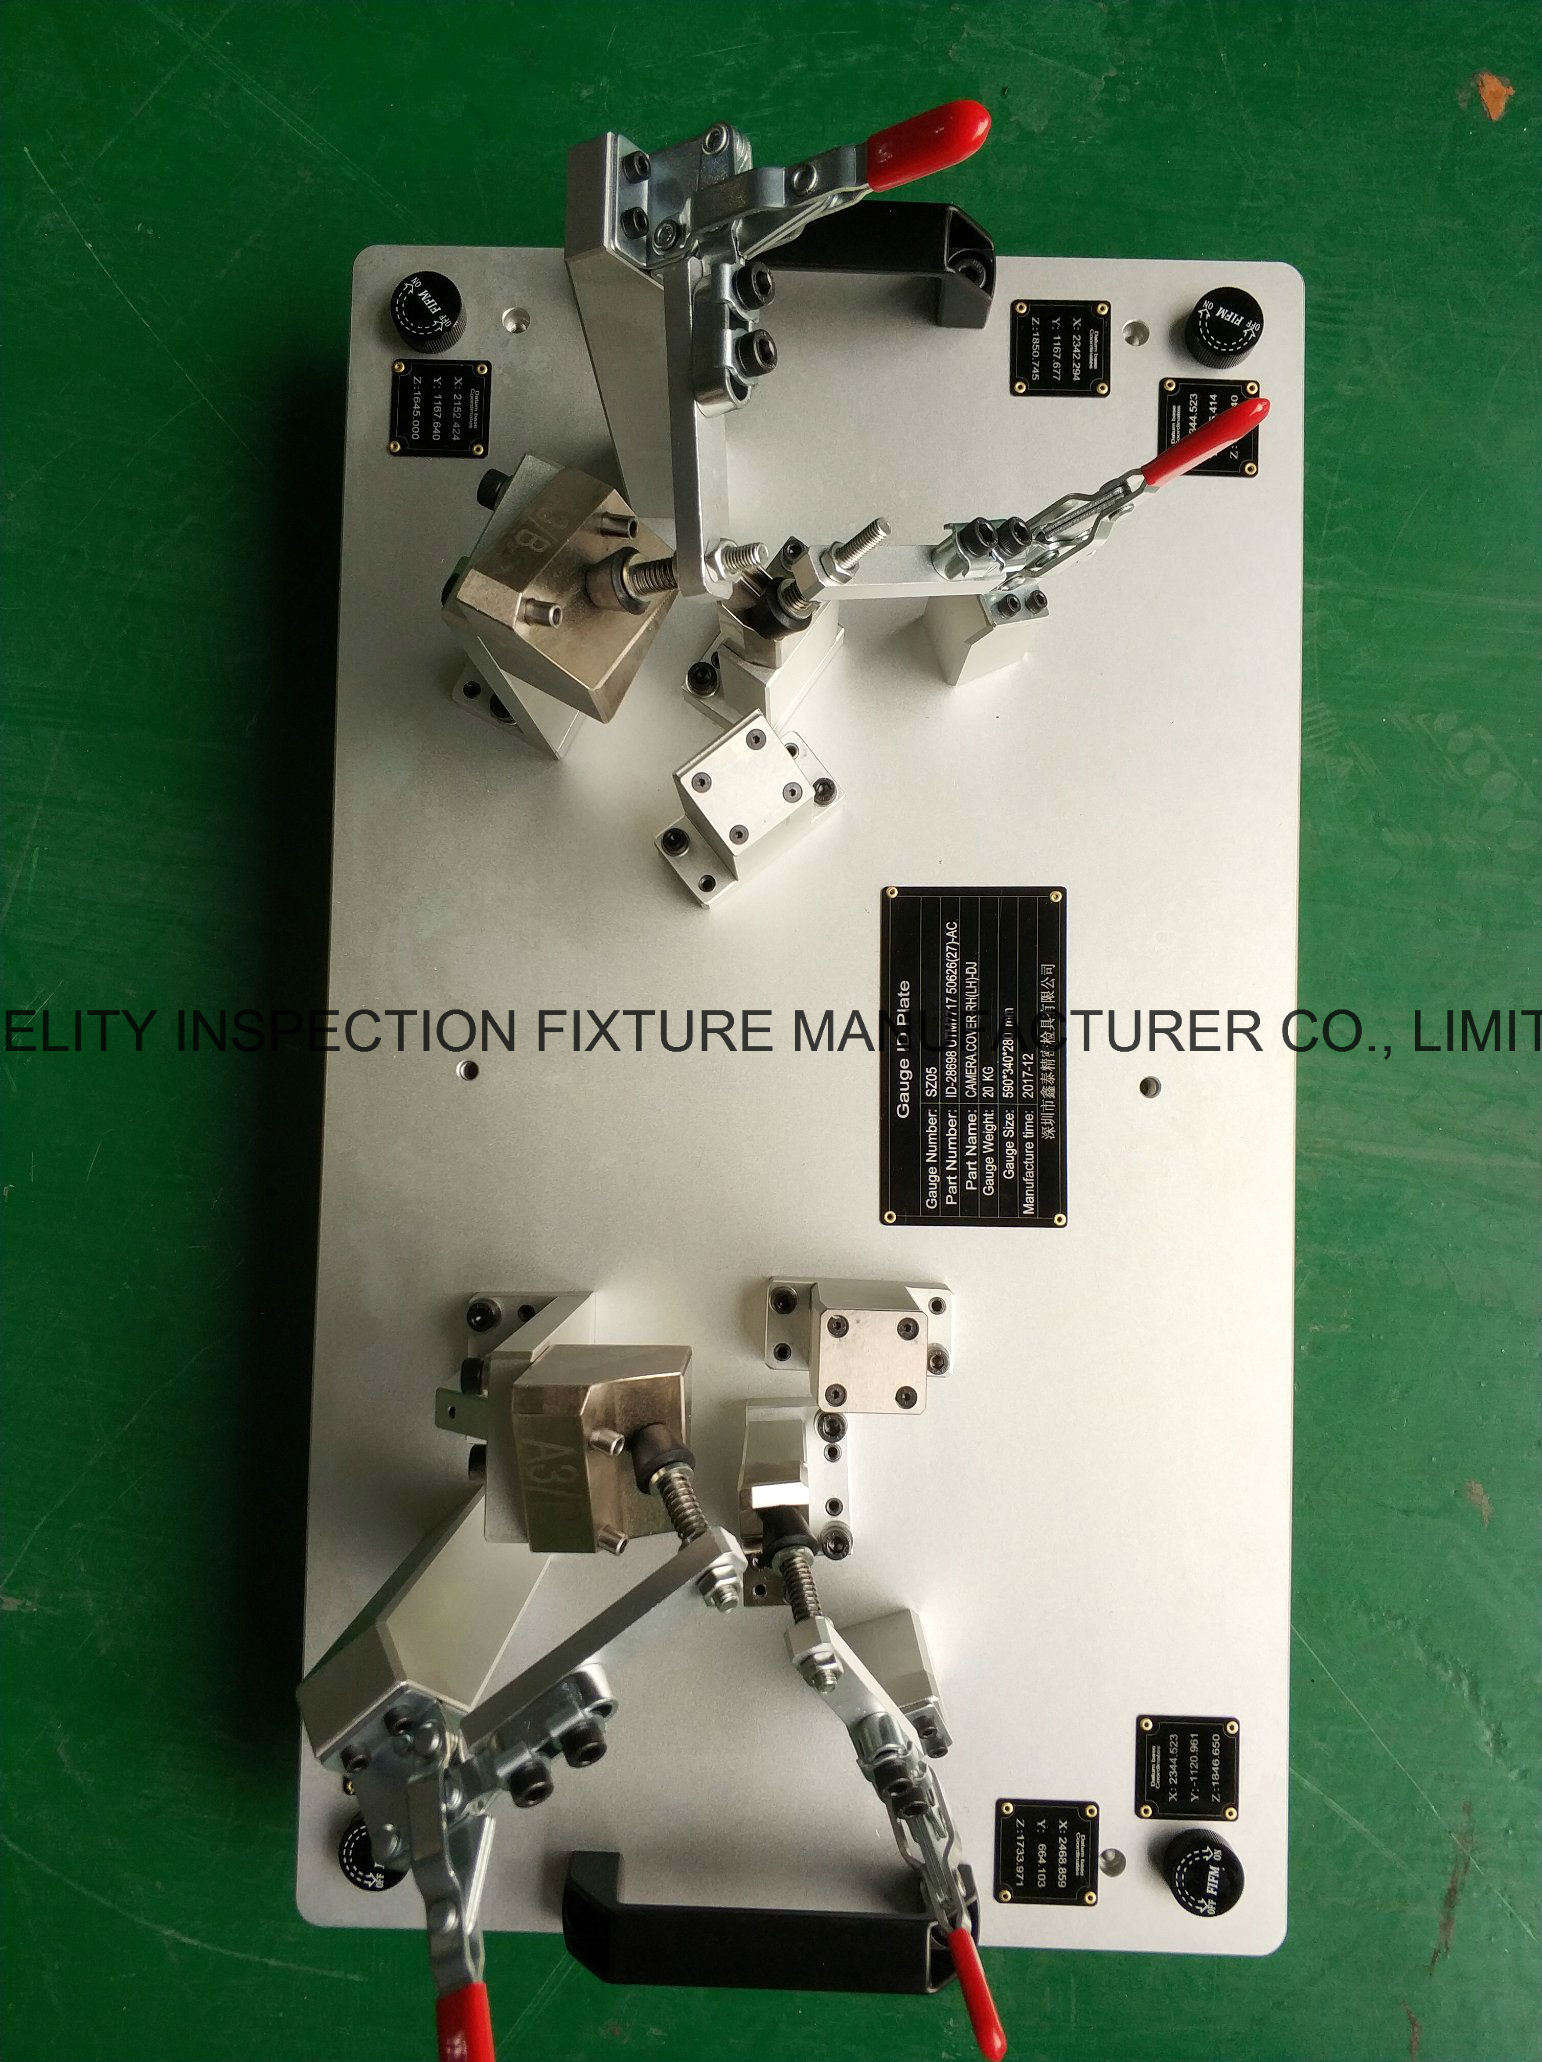 Customized Checking Fixture/Jig for BMW Released-Camera. Cover